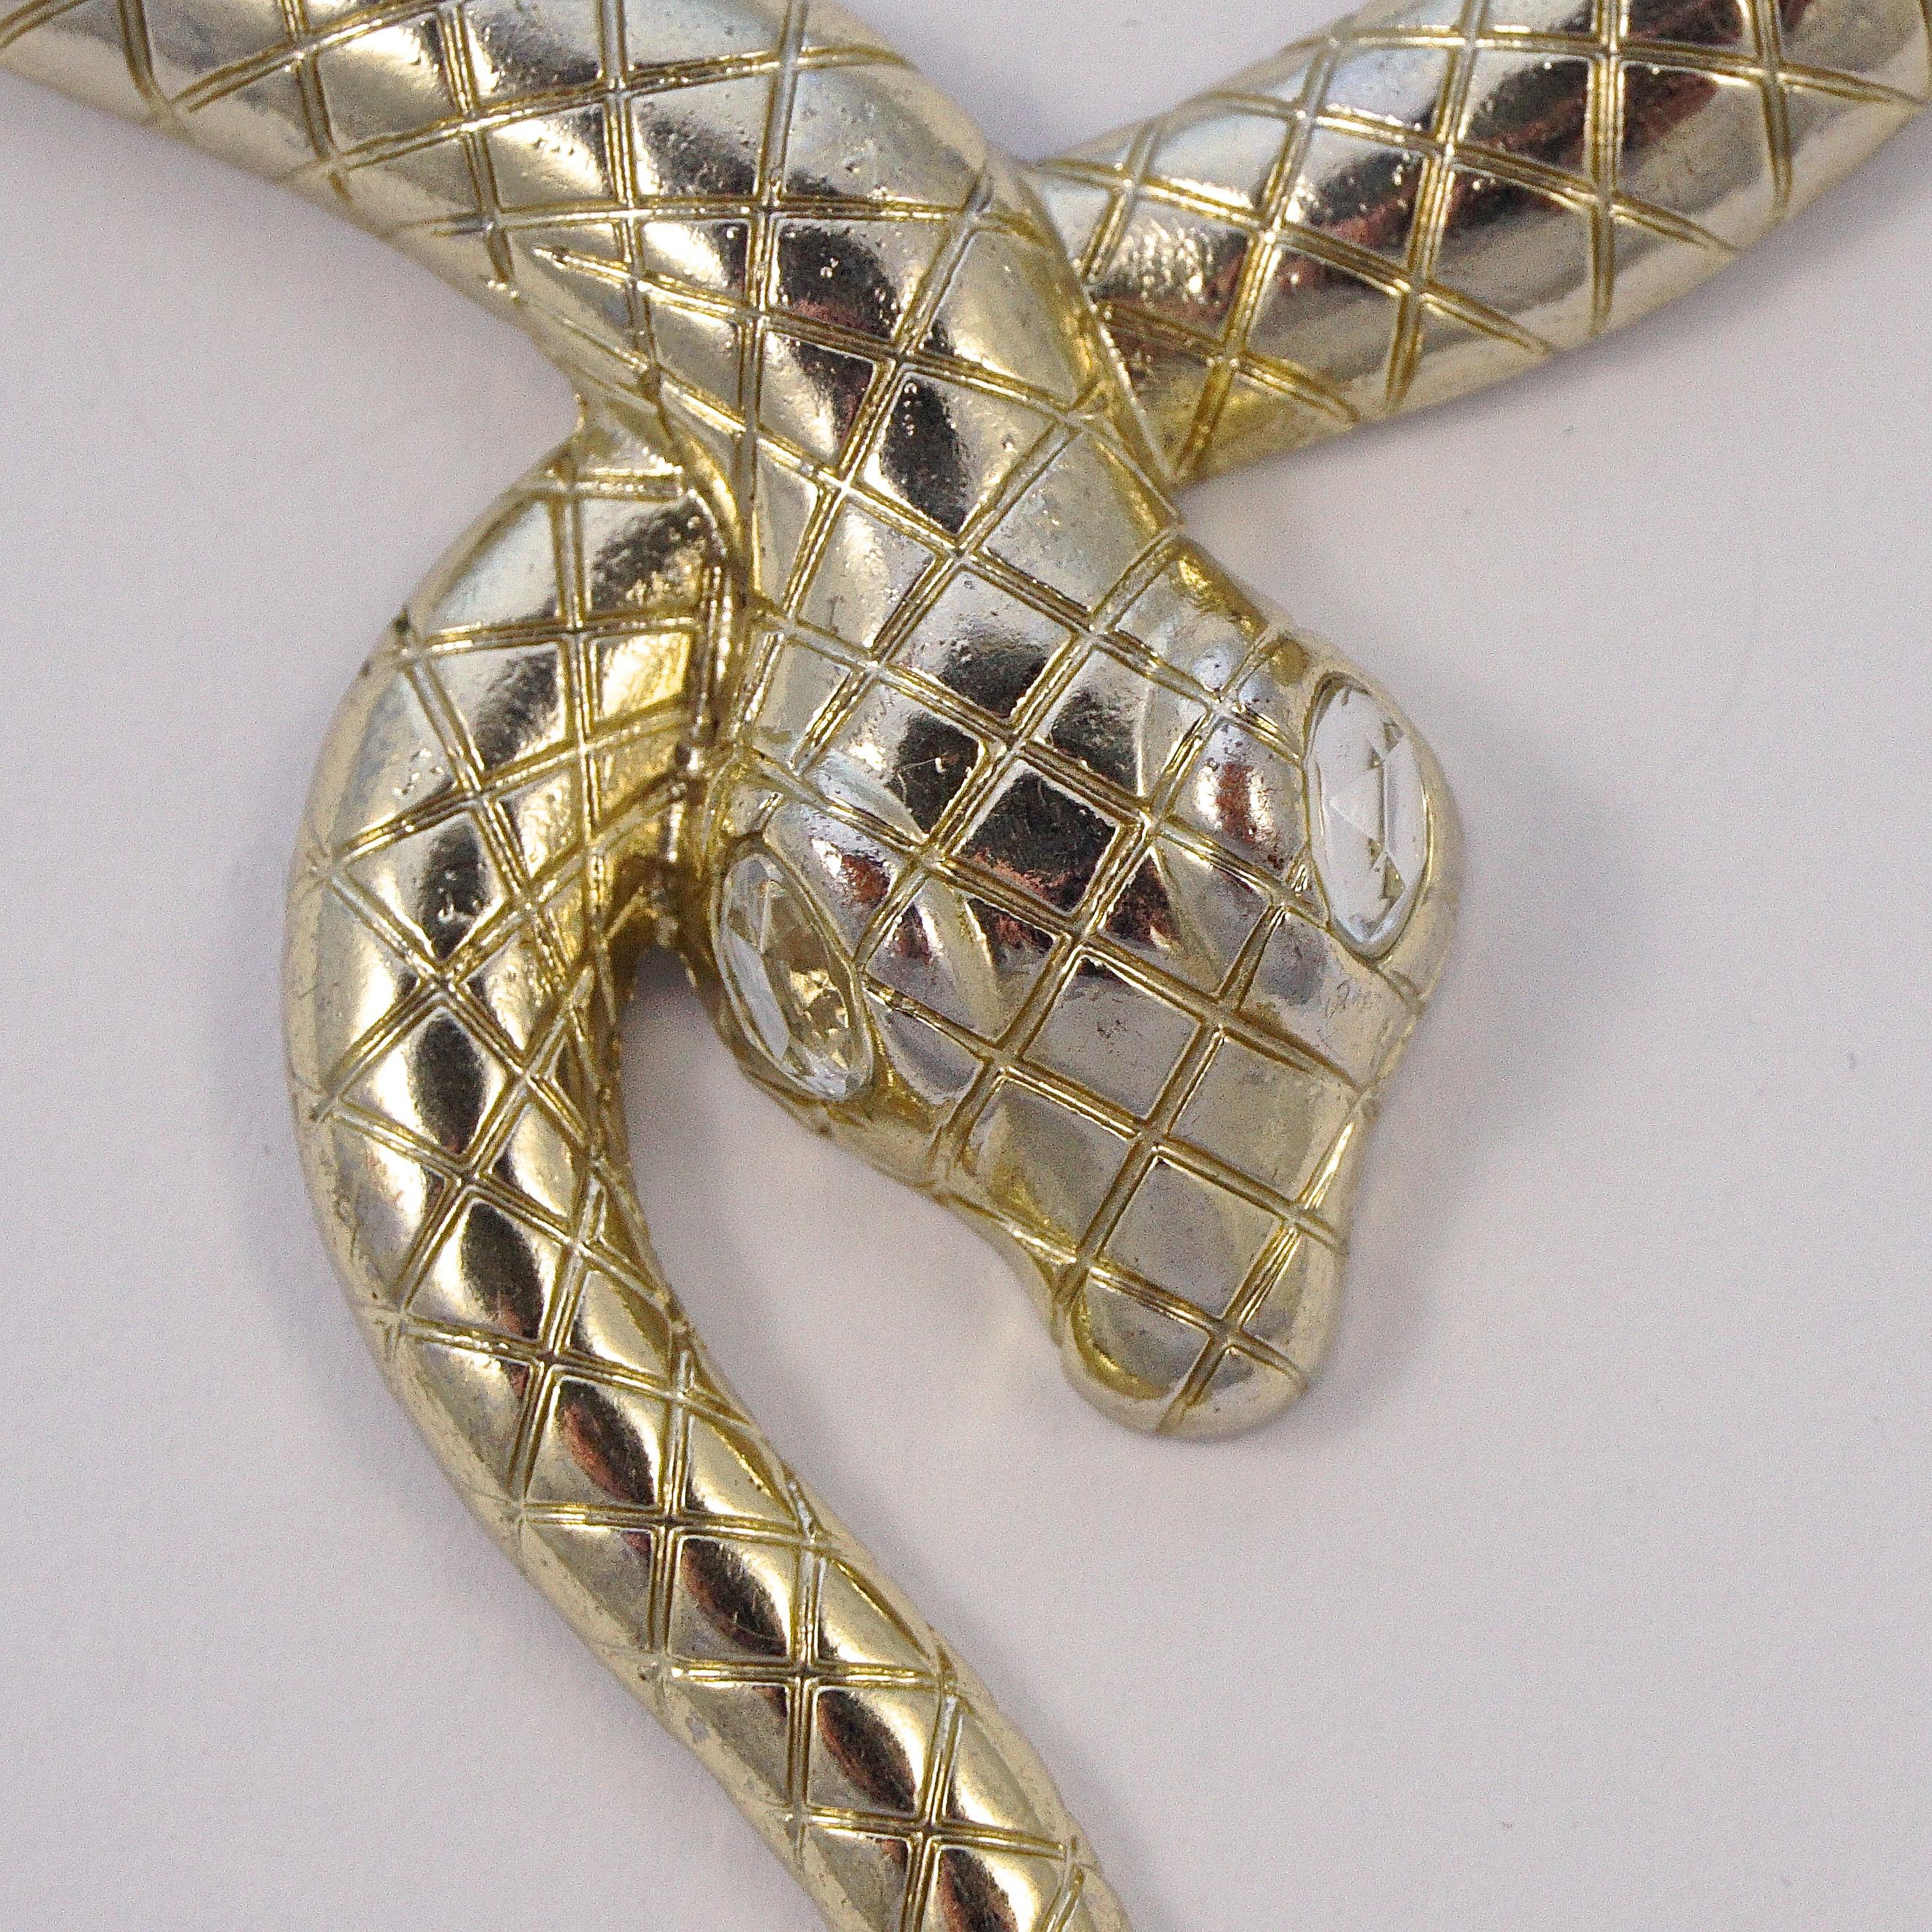 Pale gold plated mesh link chain necklace, featuring a fabulous textured snake with clear faceted rhinestone eyes. Measuring width 8mm / .3 inch, by length approximately 52cm / 20.4 inches not including the extension which is length 7.8cm / 3